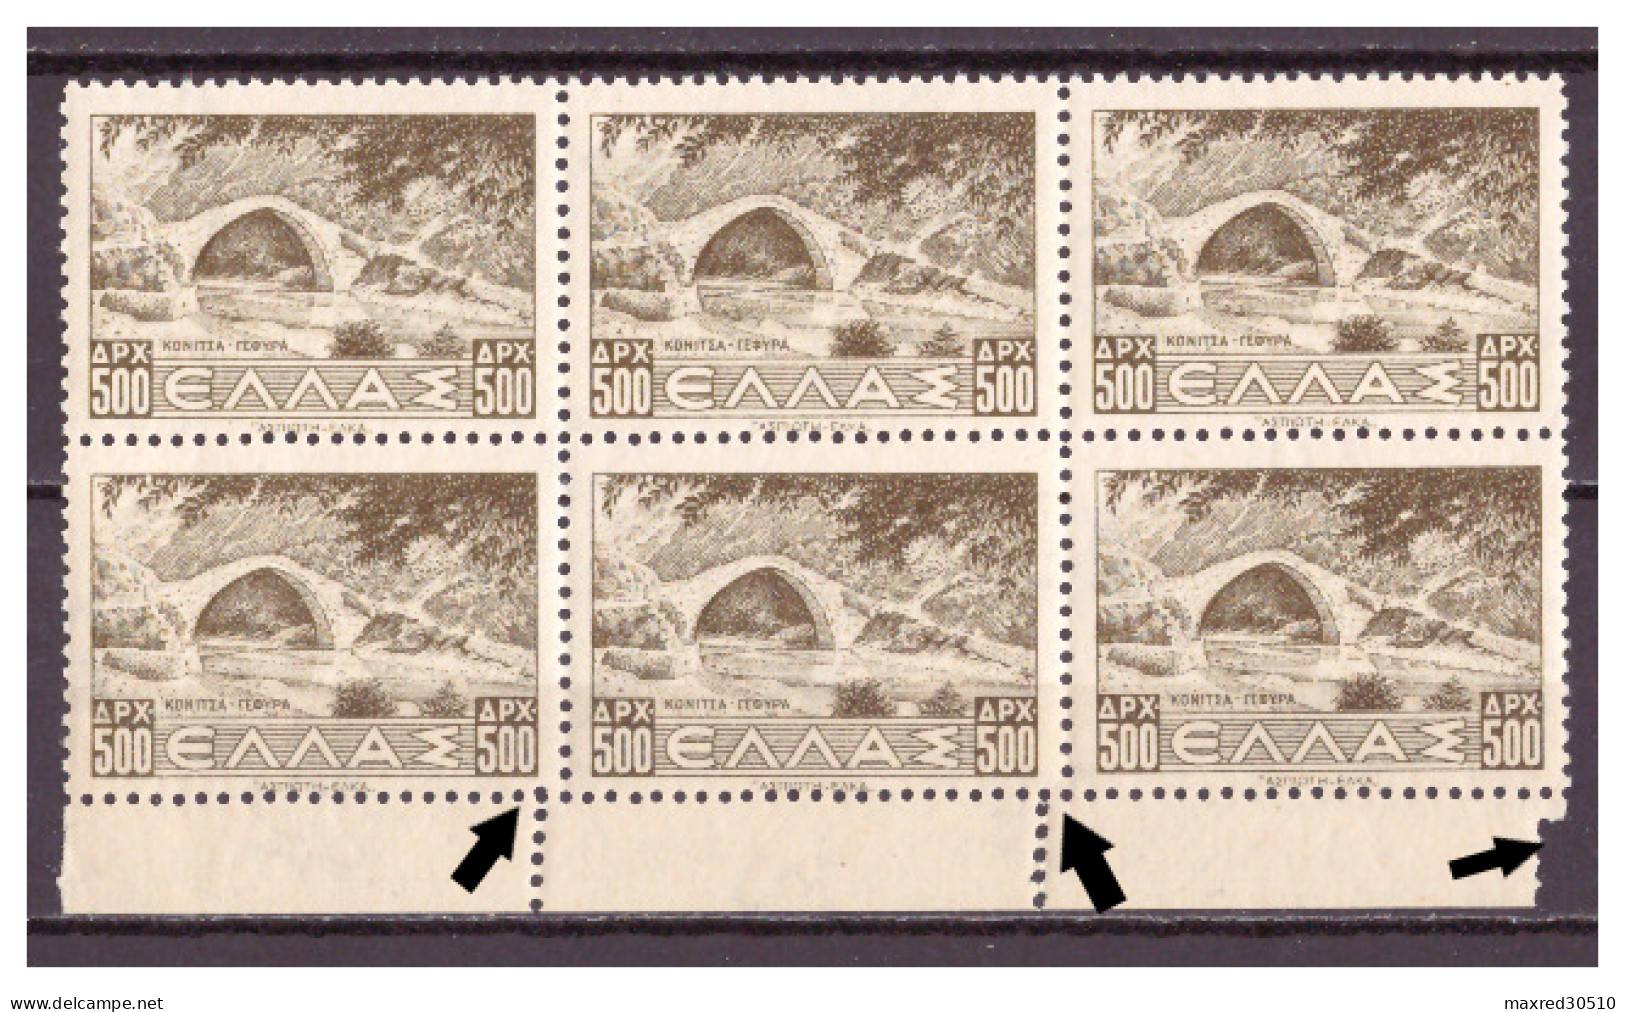 GREECE 1942 - 44 BLOCK OF 6X500DR. OF "LANDSCAPES ISSUE" WITH PRINTING ERRORS AT THE VERTICAL PERFO OF MARGIN SHEET MNH - Variétés Et Curiosités